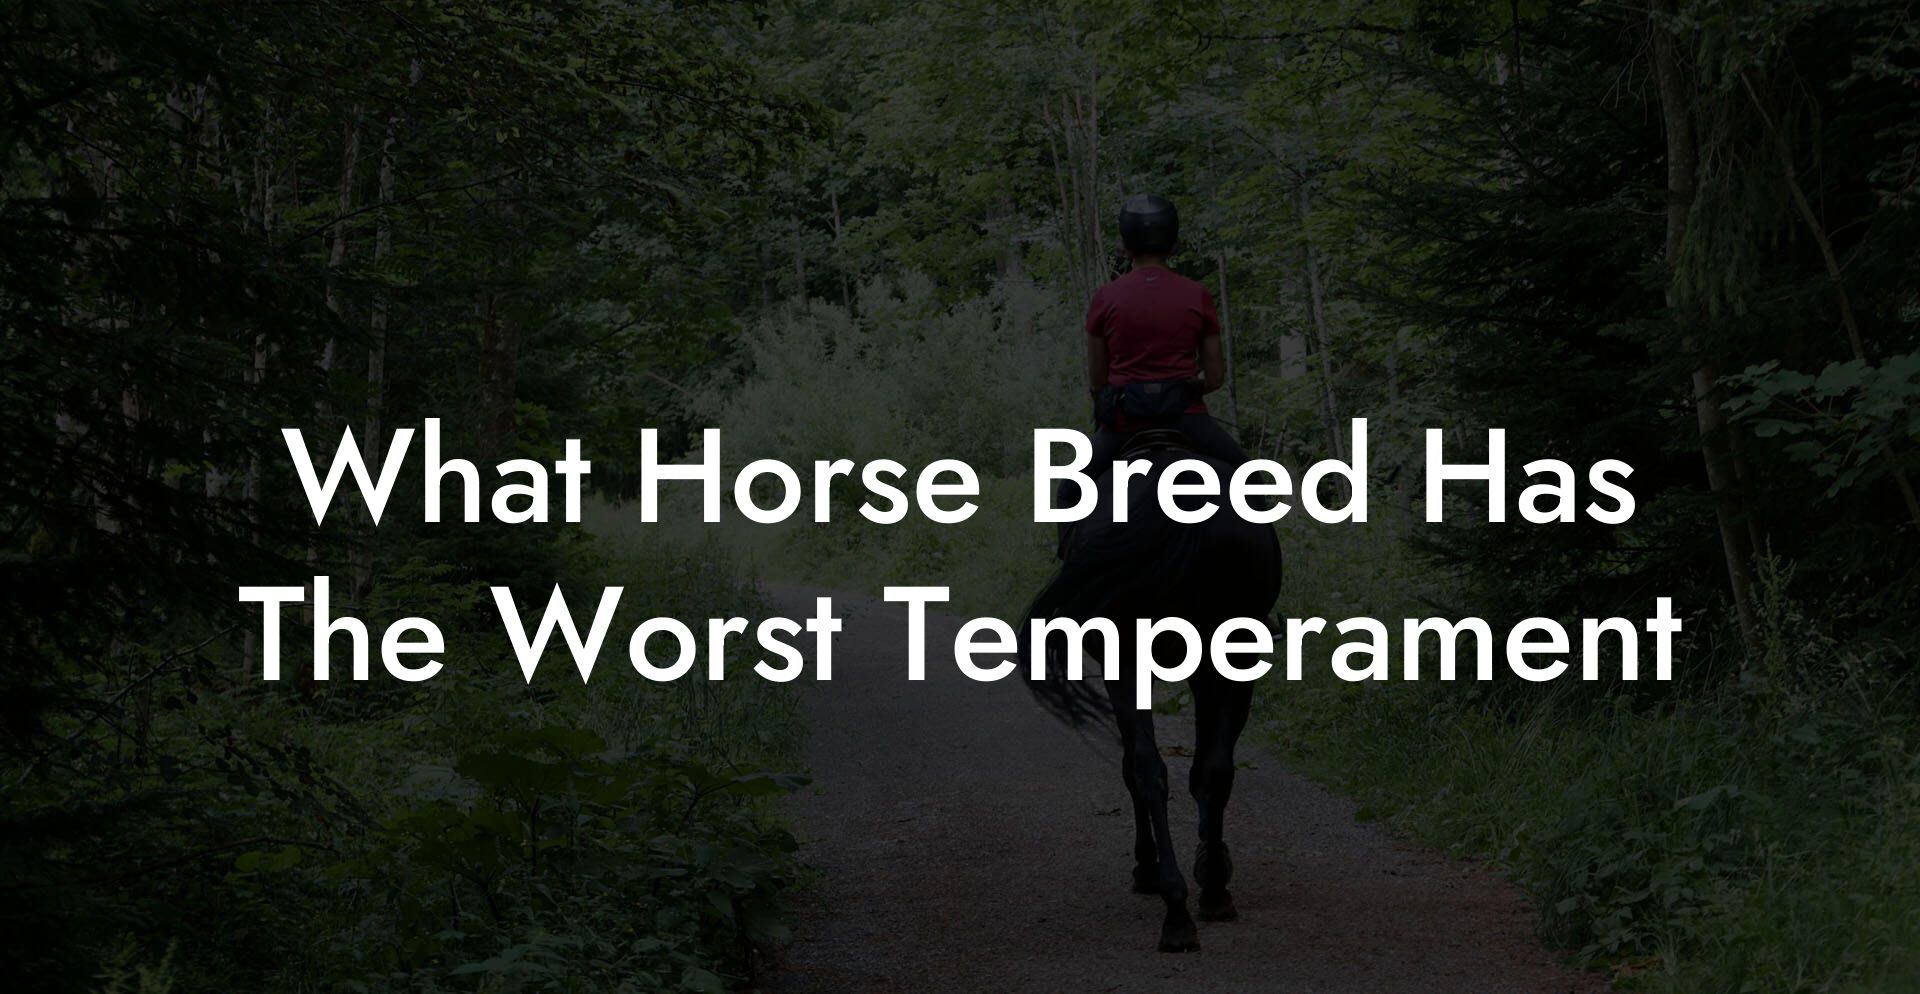 What Horse Breed Has The Worst Temperament